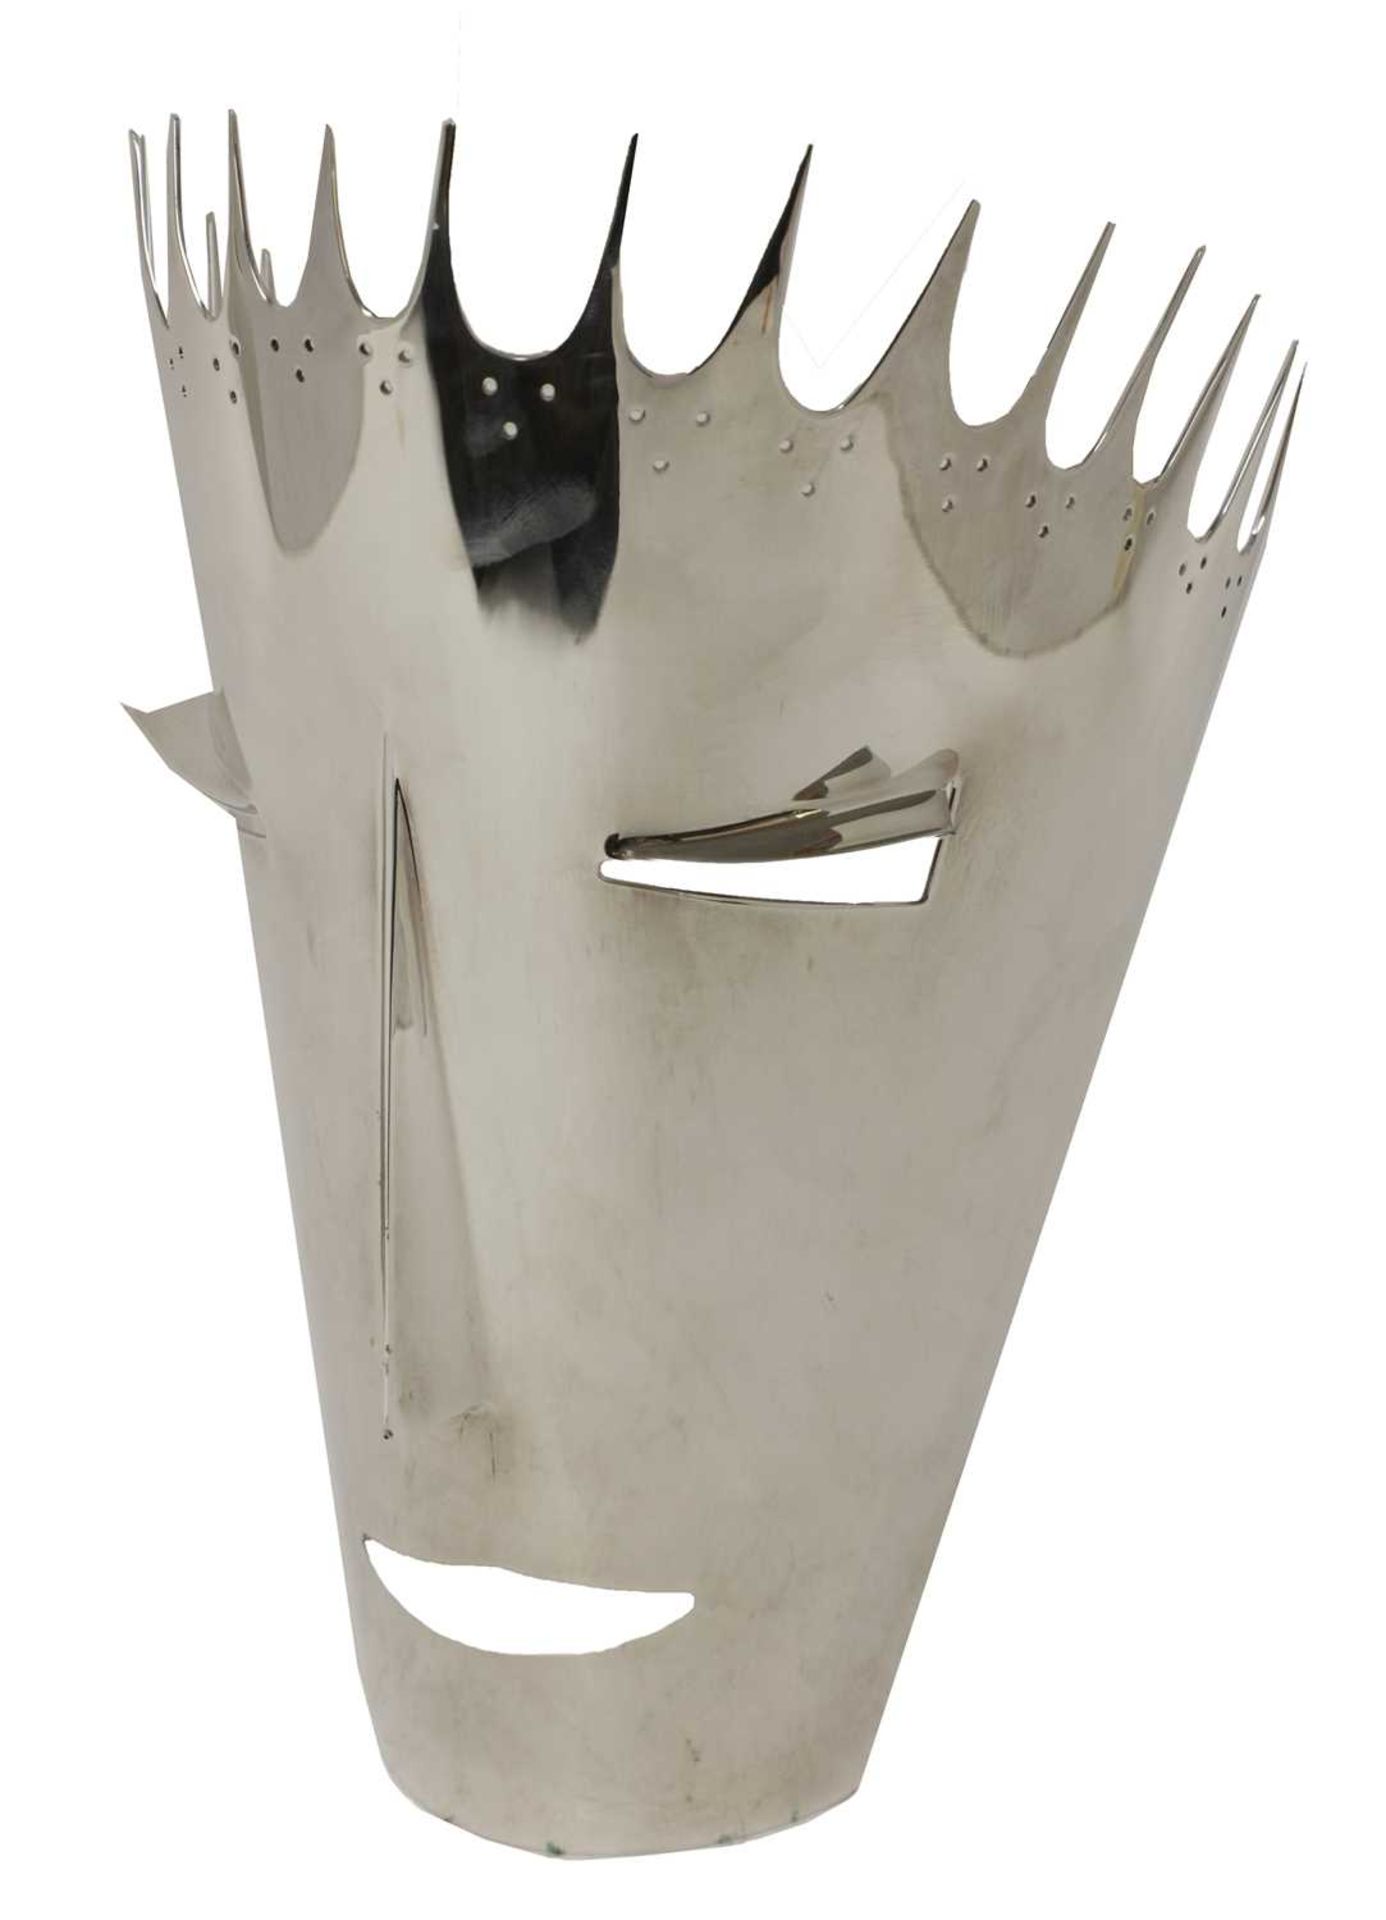 A silver-plated face mask,